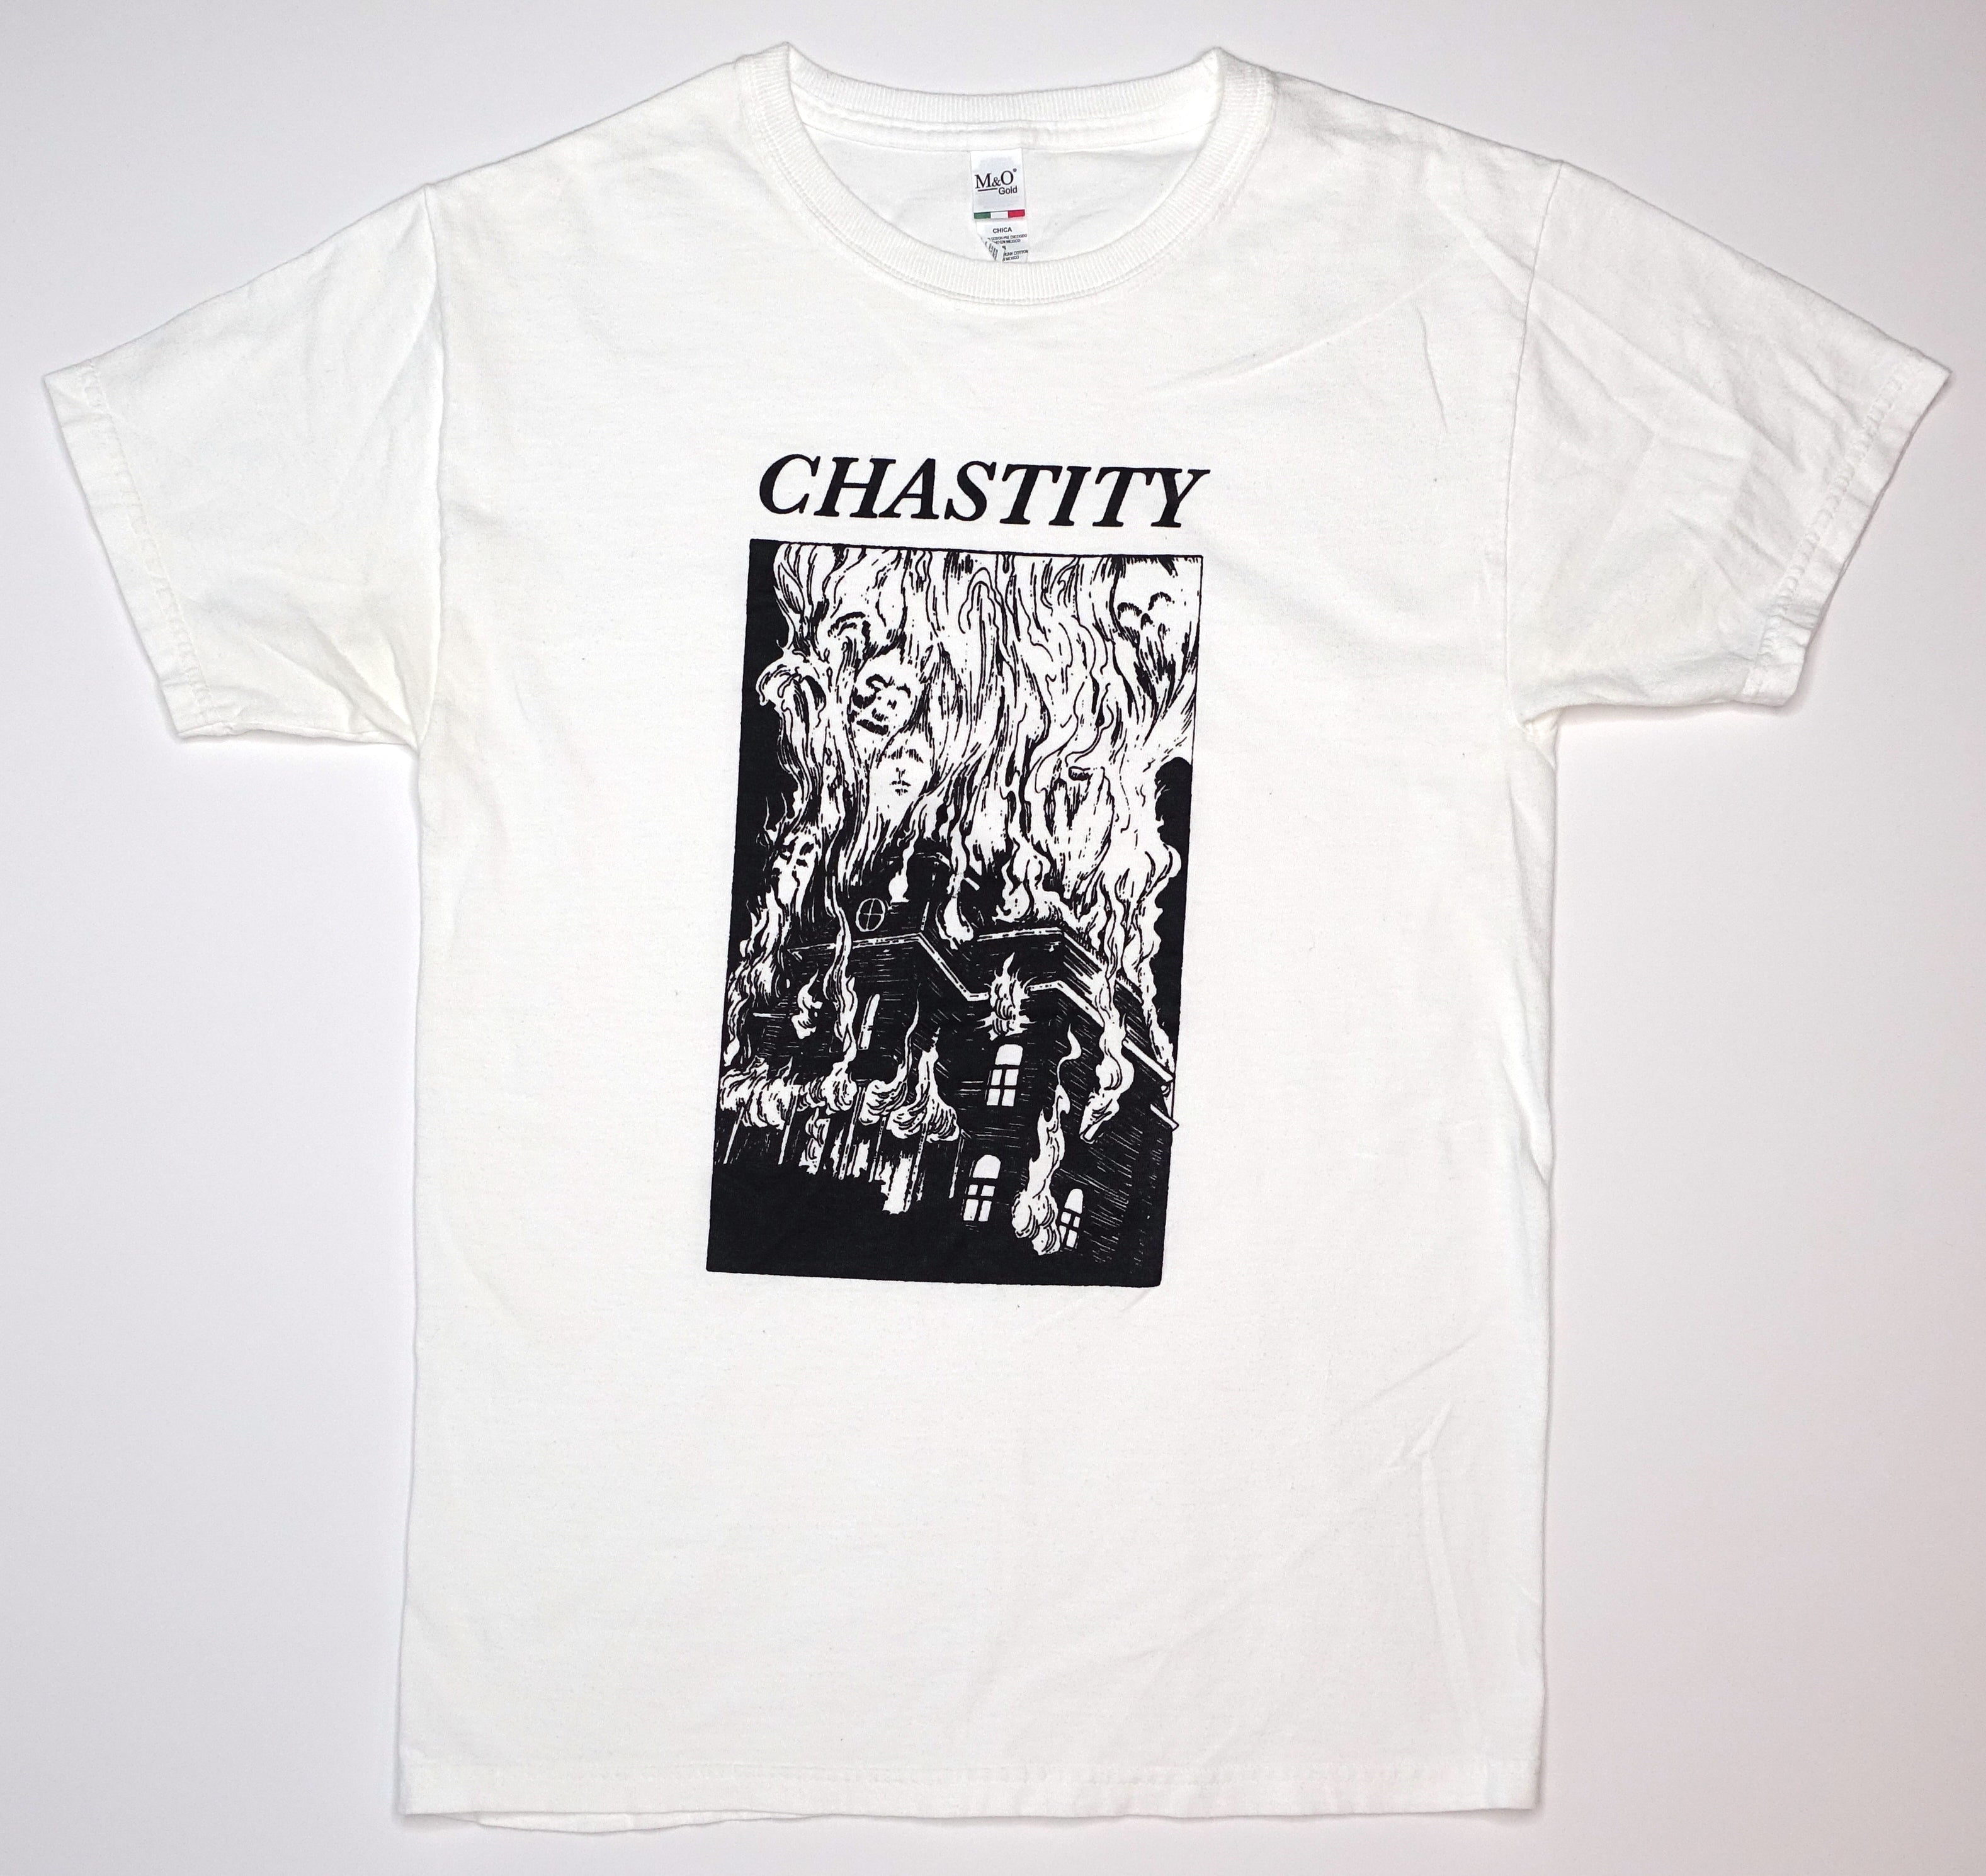 Chastity – Home Made Satan Tour Shirt Size Small